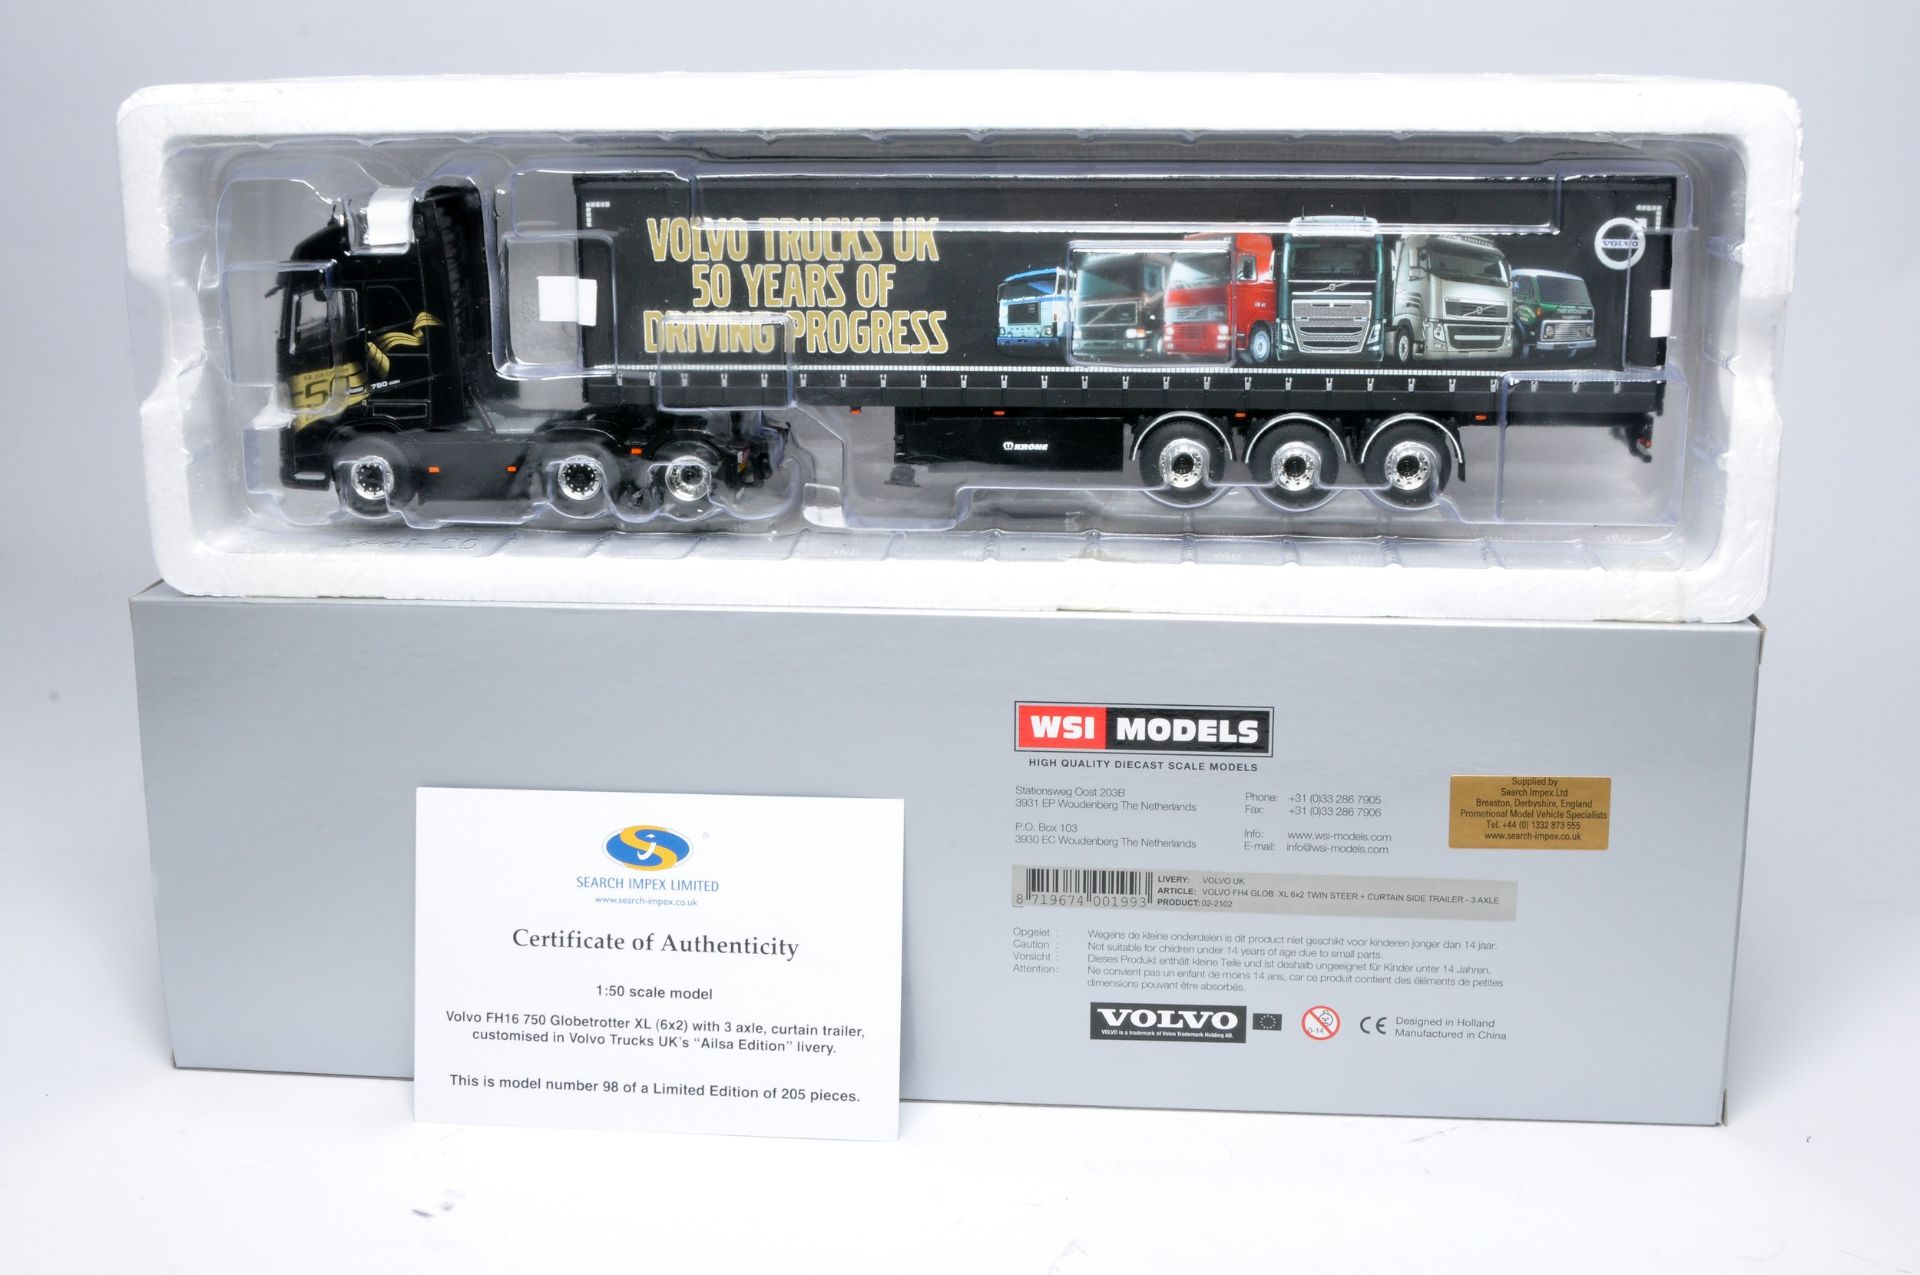 WSI 1/50 diecast model truck issue comprising Volvo FH16 Curtain Trailer in the livery of Volvo '